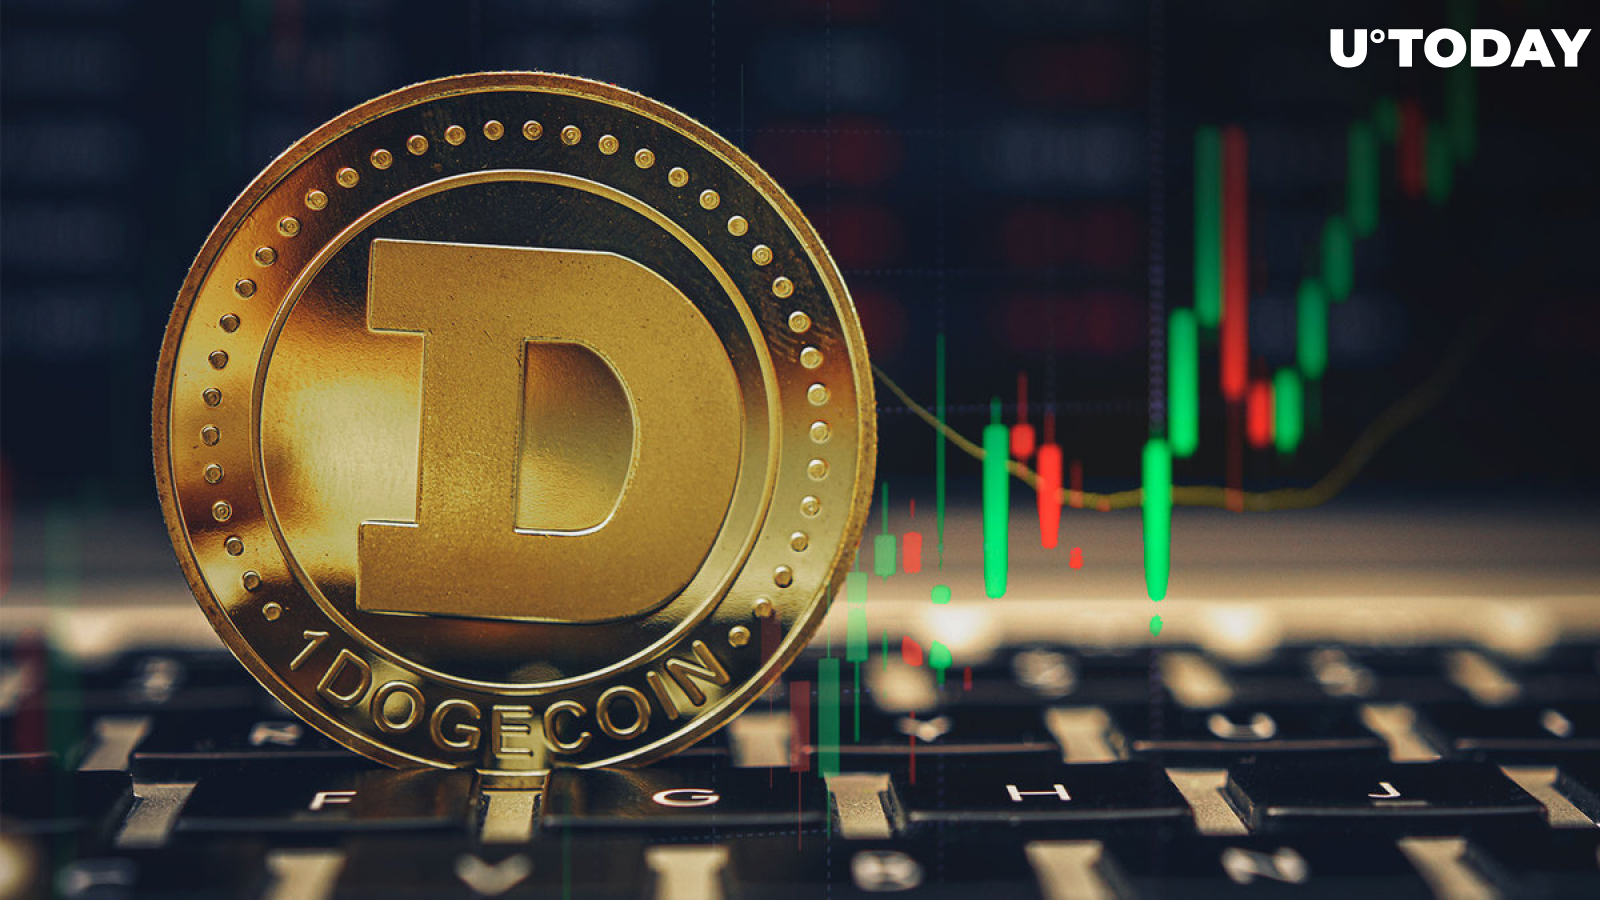 Dogecoin (DOGE) Eyes 16% Price Rise If This Prediction Comes True